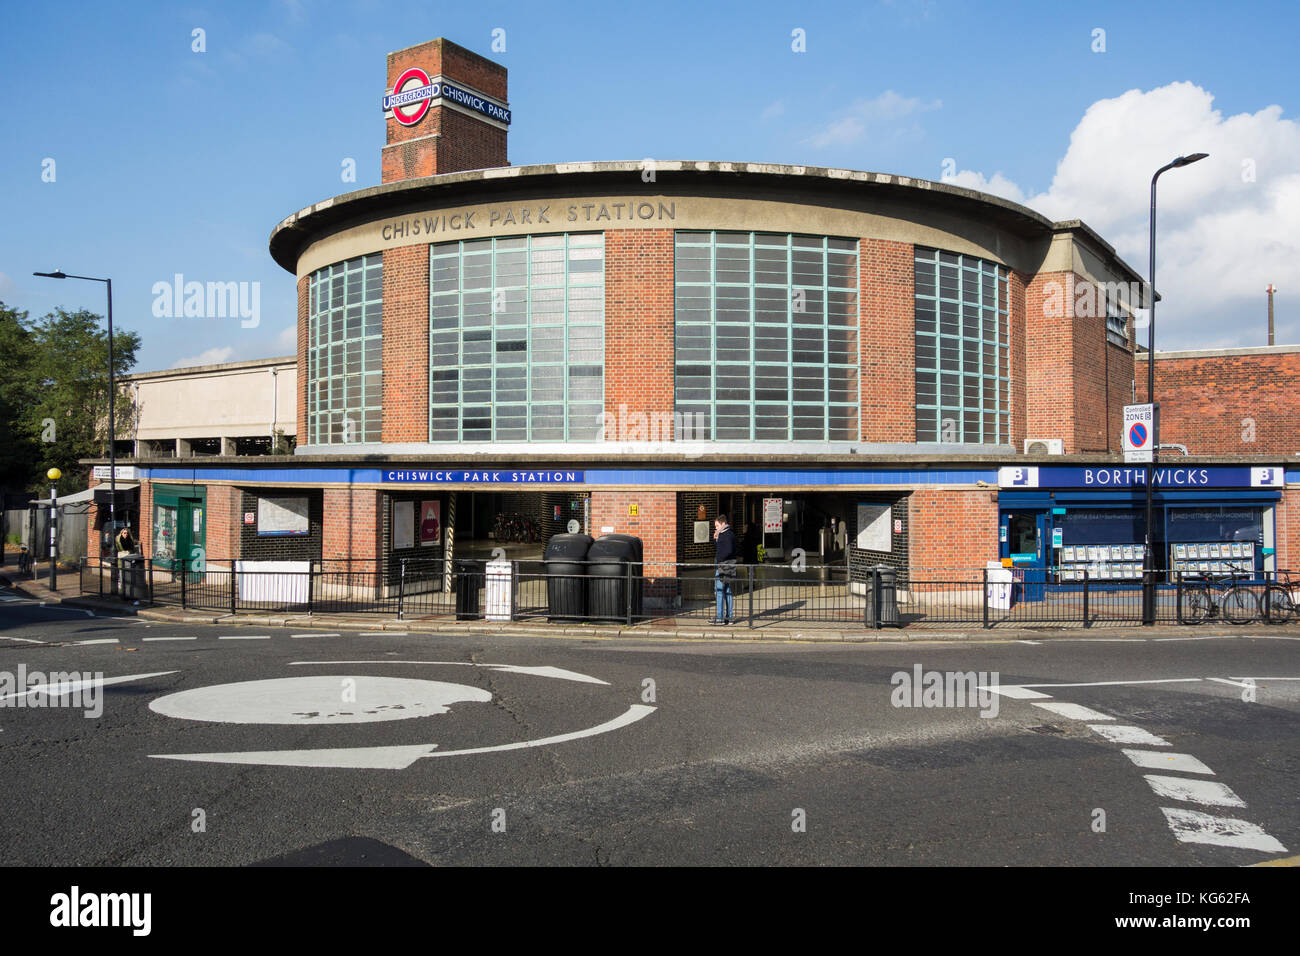 Exterior of Charles Holden's Chiswick Park Station, Chiswick, west London, England, UK. Stock Photo